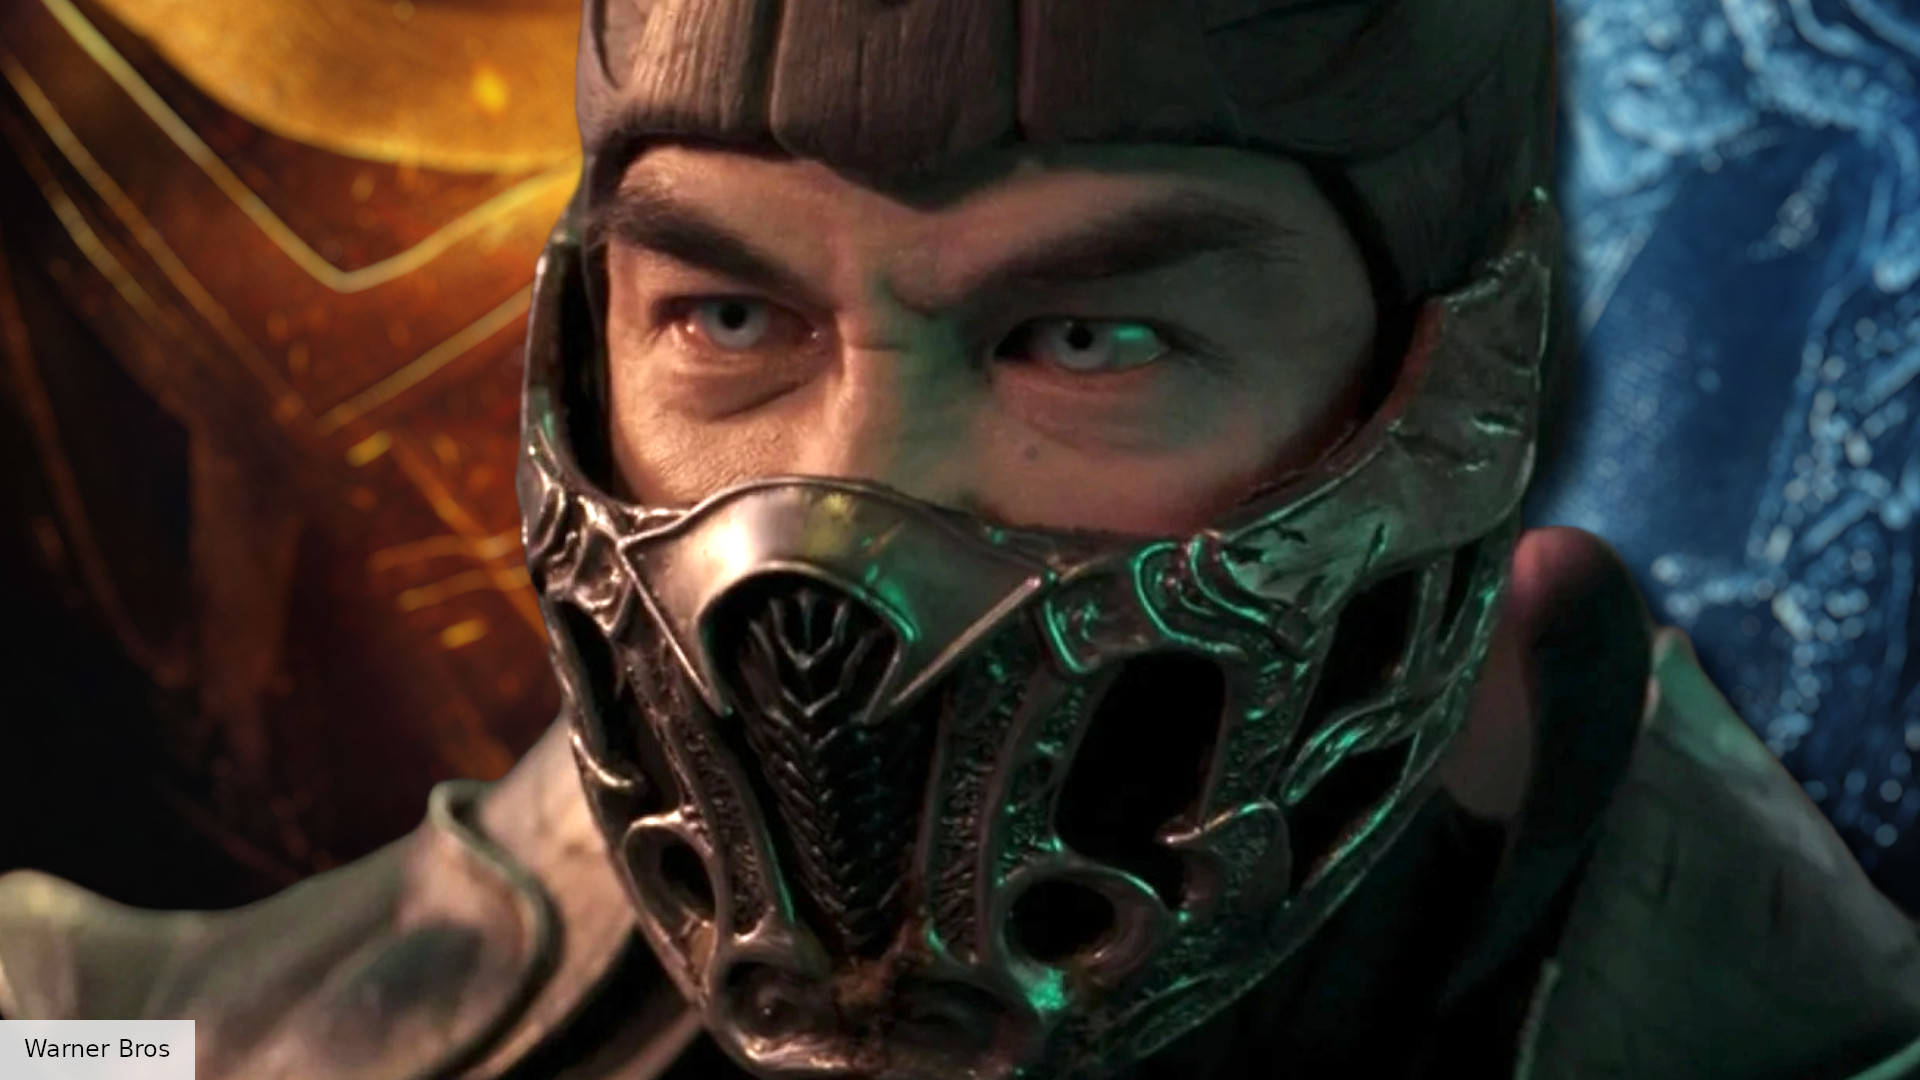 Mortal Kombat 2 release date speculation, plot, cast, and news